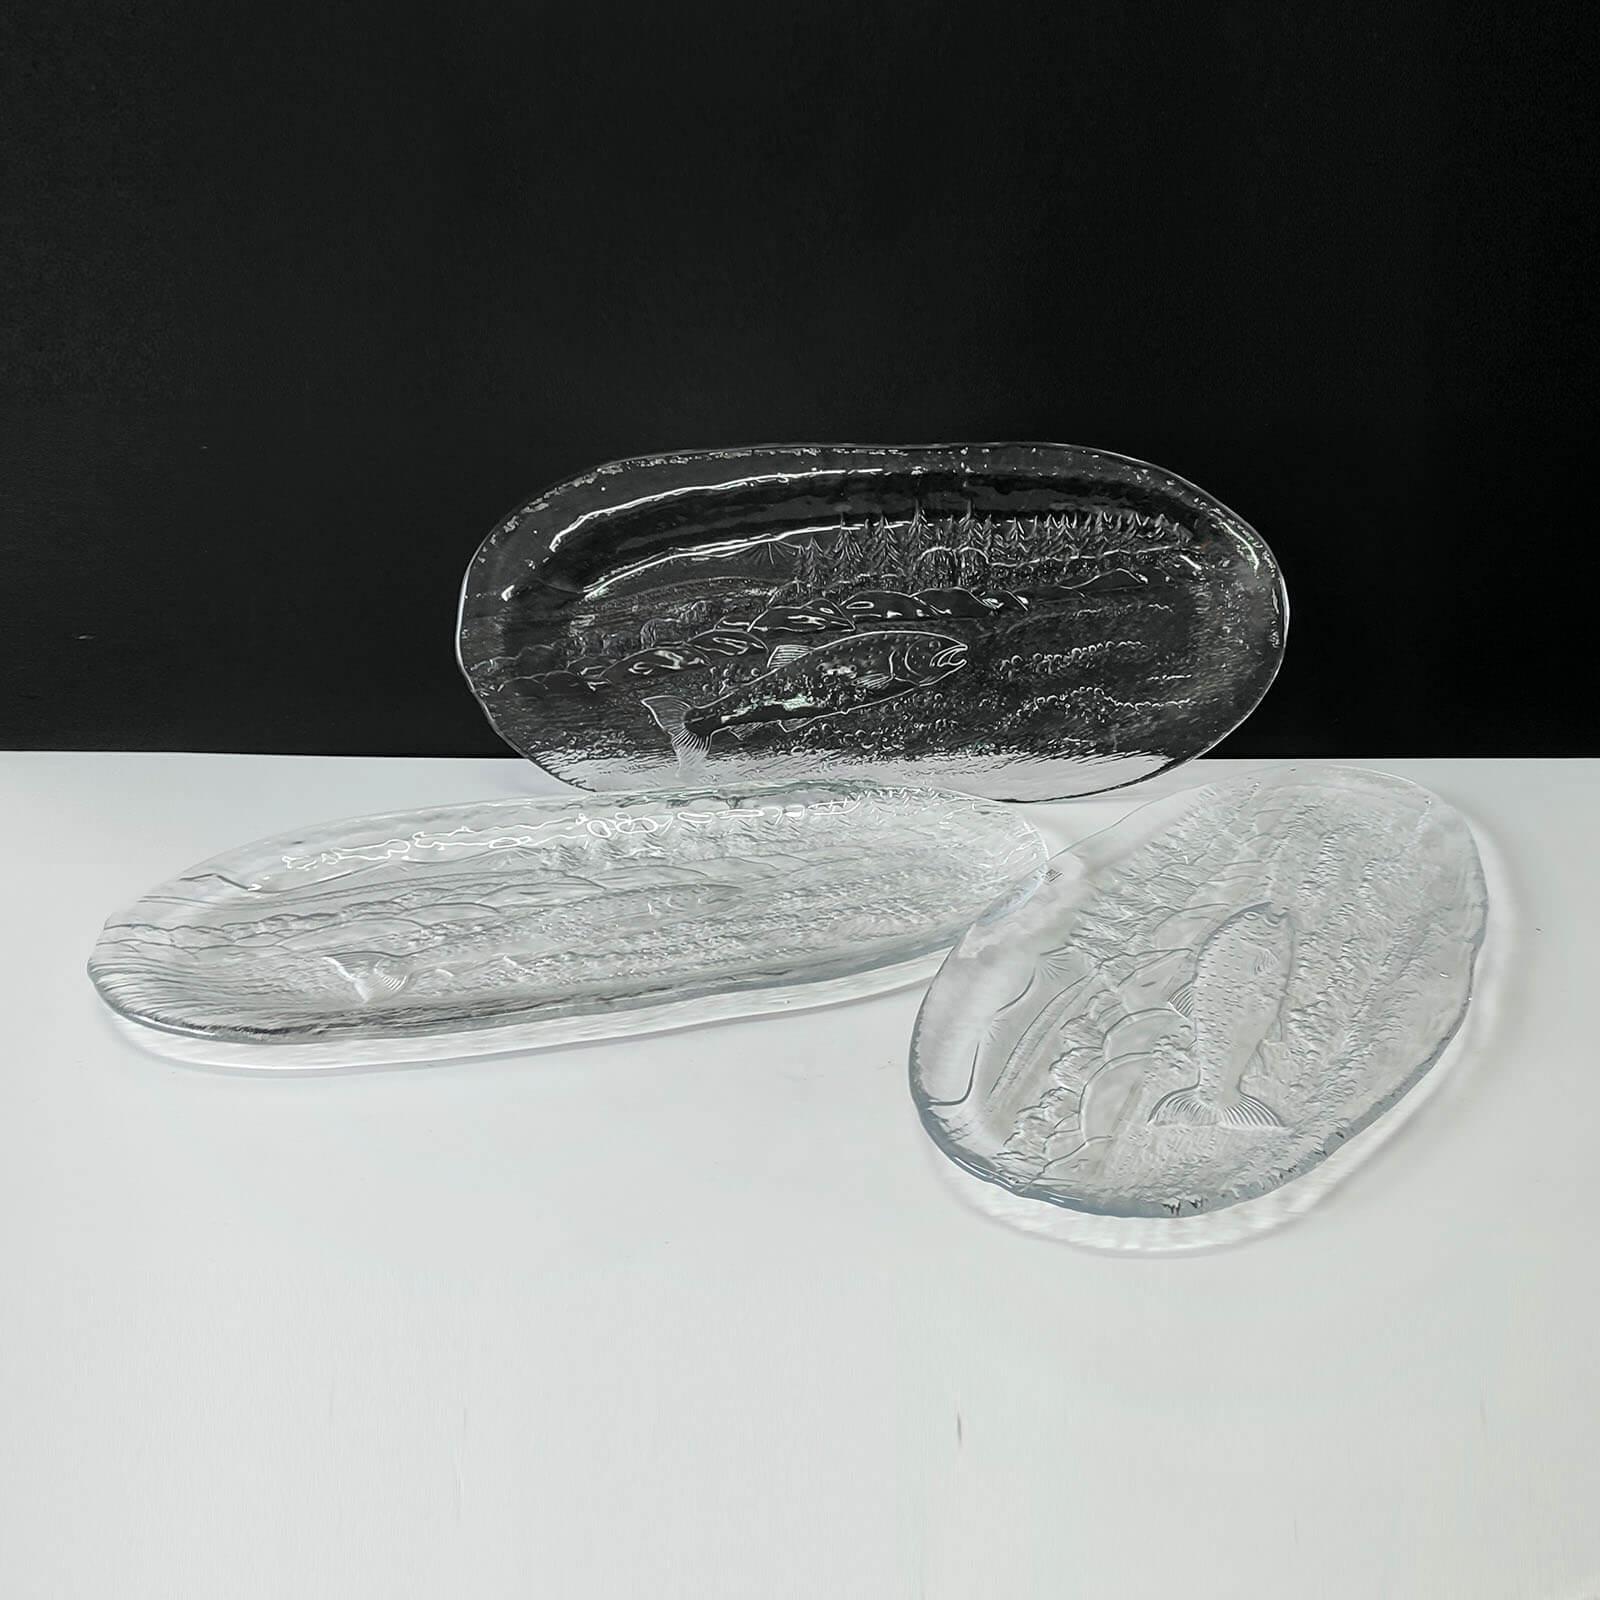 
Set of Three Vintage Salmon Platters, Glass, Paul Isling for Nybro Glasbruk, Sweden.
With original manufacturer labels. In excellent condition.

Dimensions:
55x24x2 cm
51x24x2 cm
49x24x2 cm